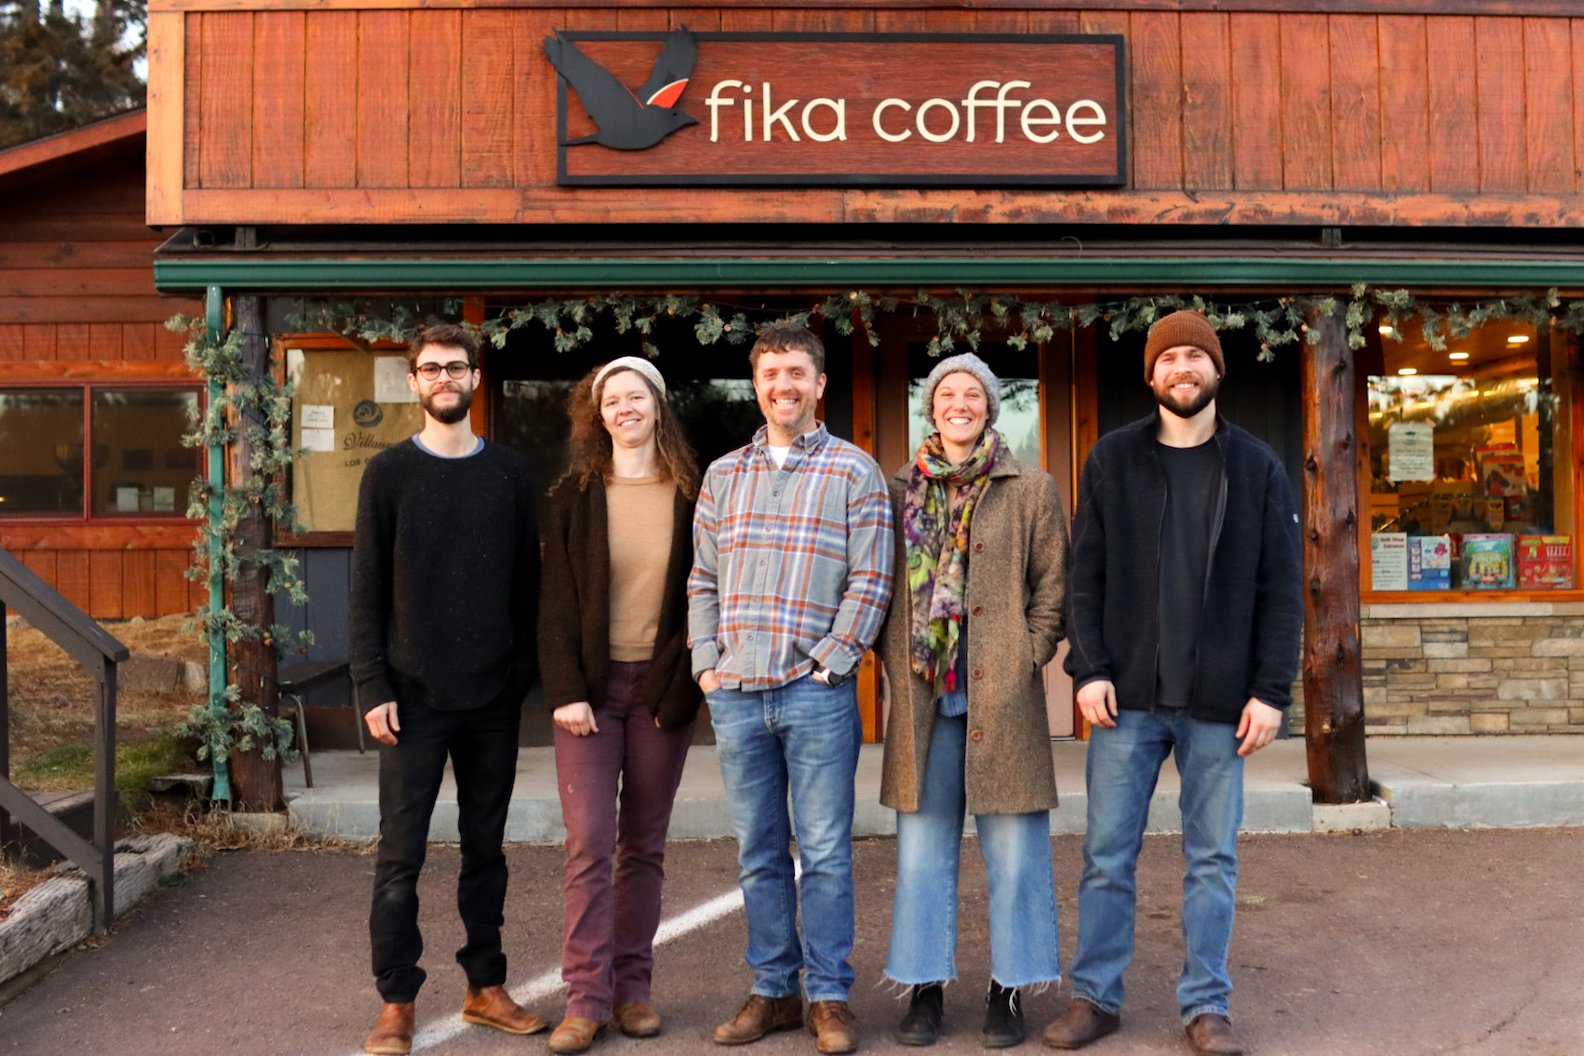 Group of people standing in front of Fika Coffee shop.